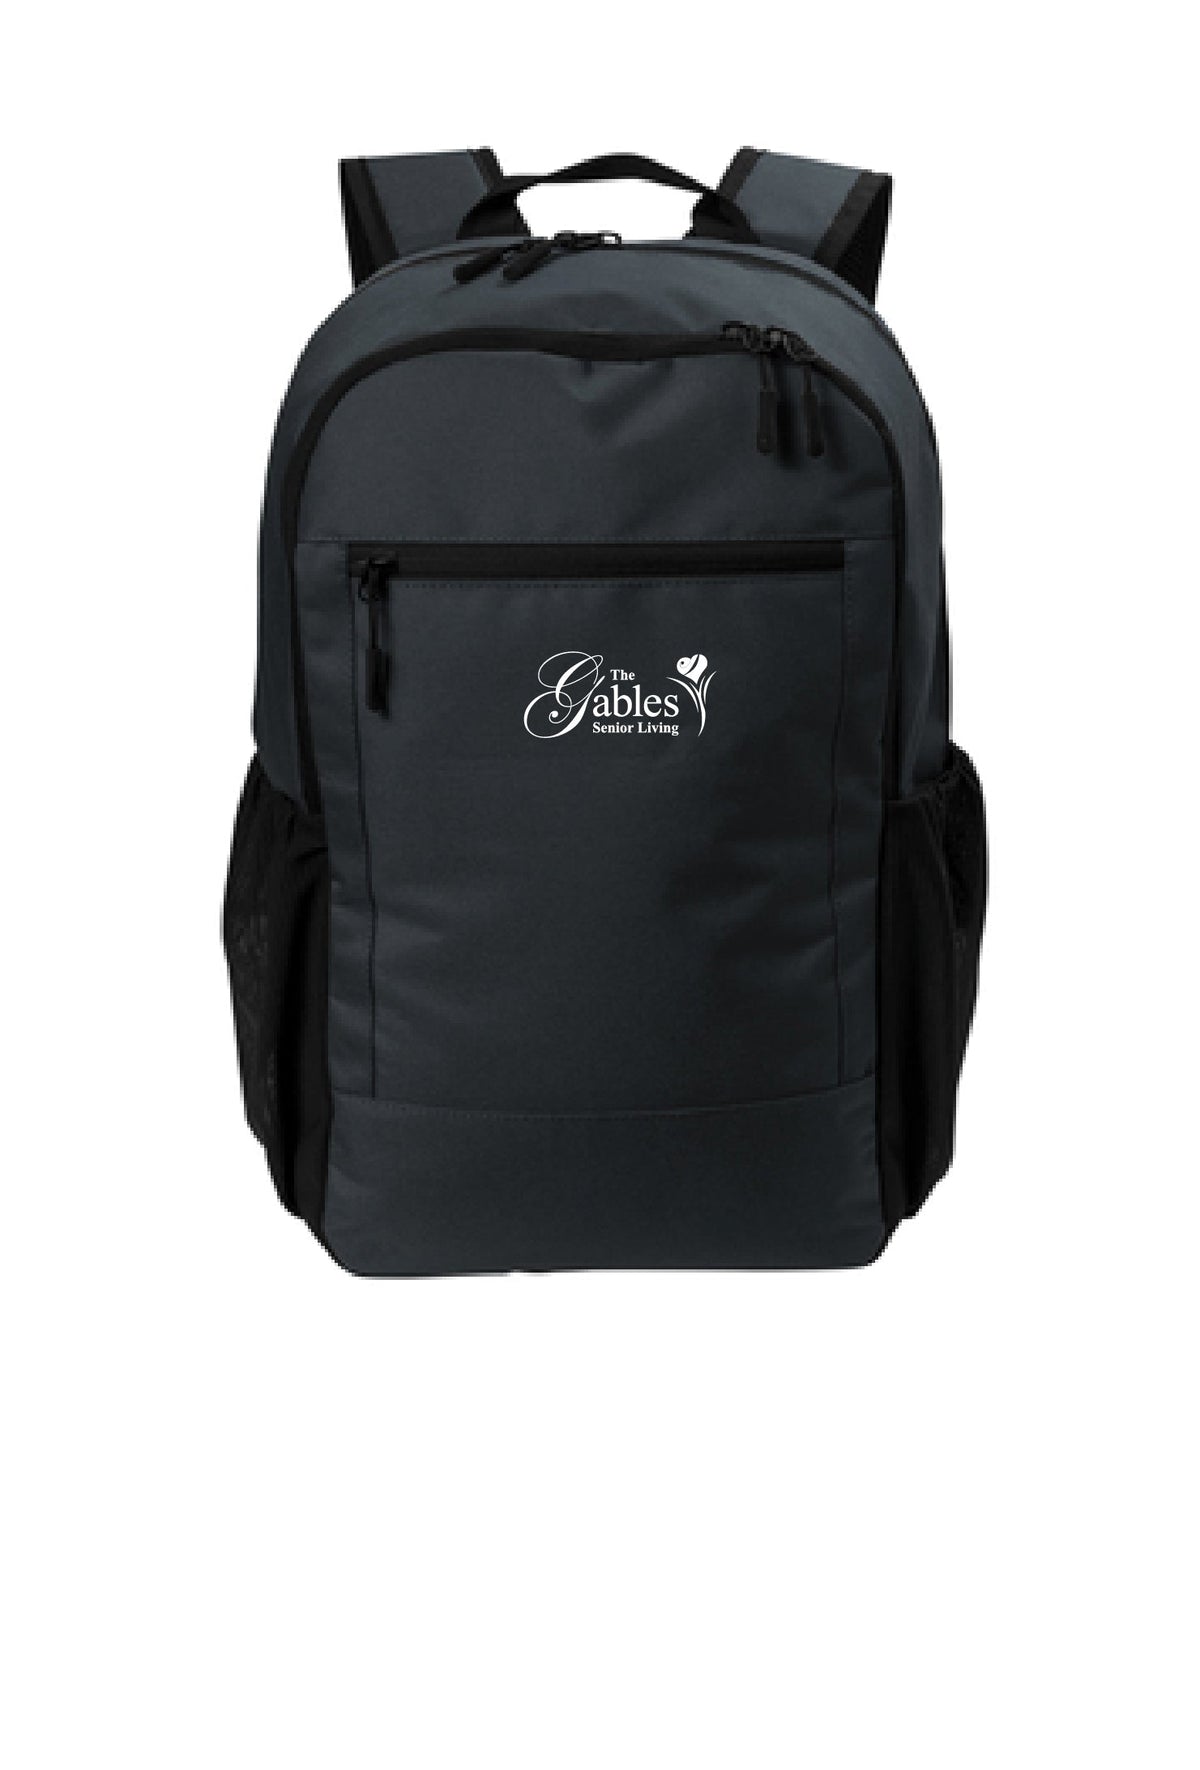 The Gables - BG226 Grey Smoke Daily Commute Backpack